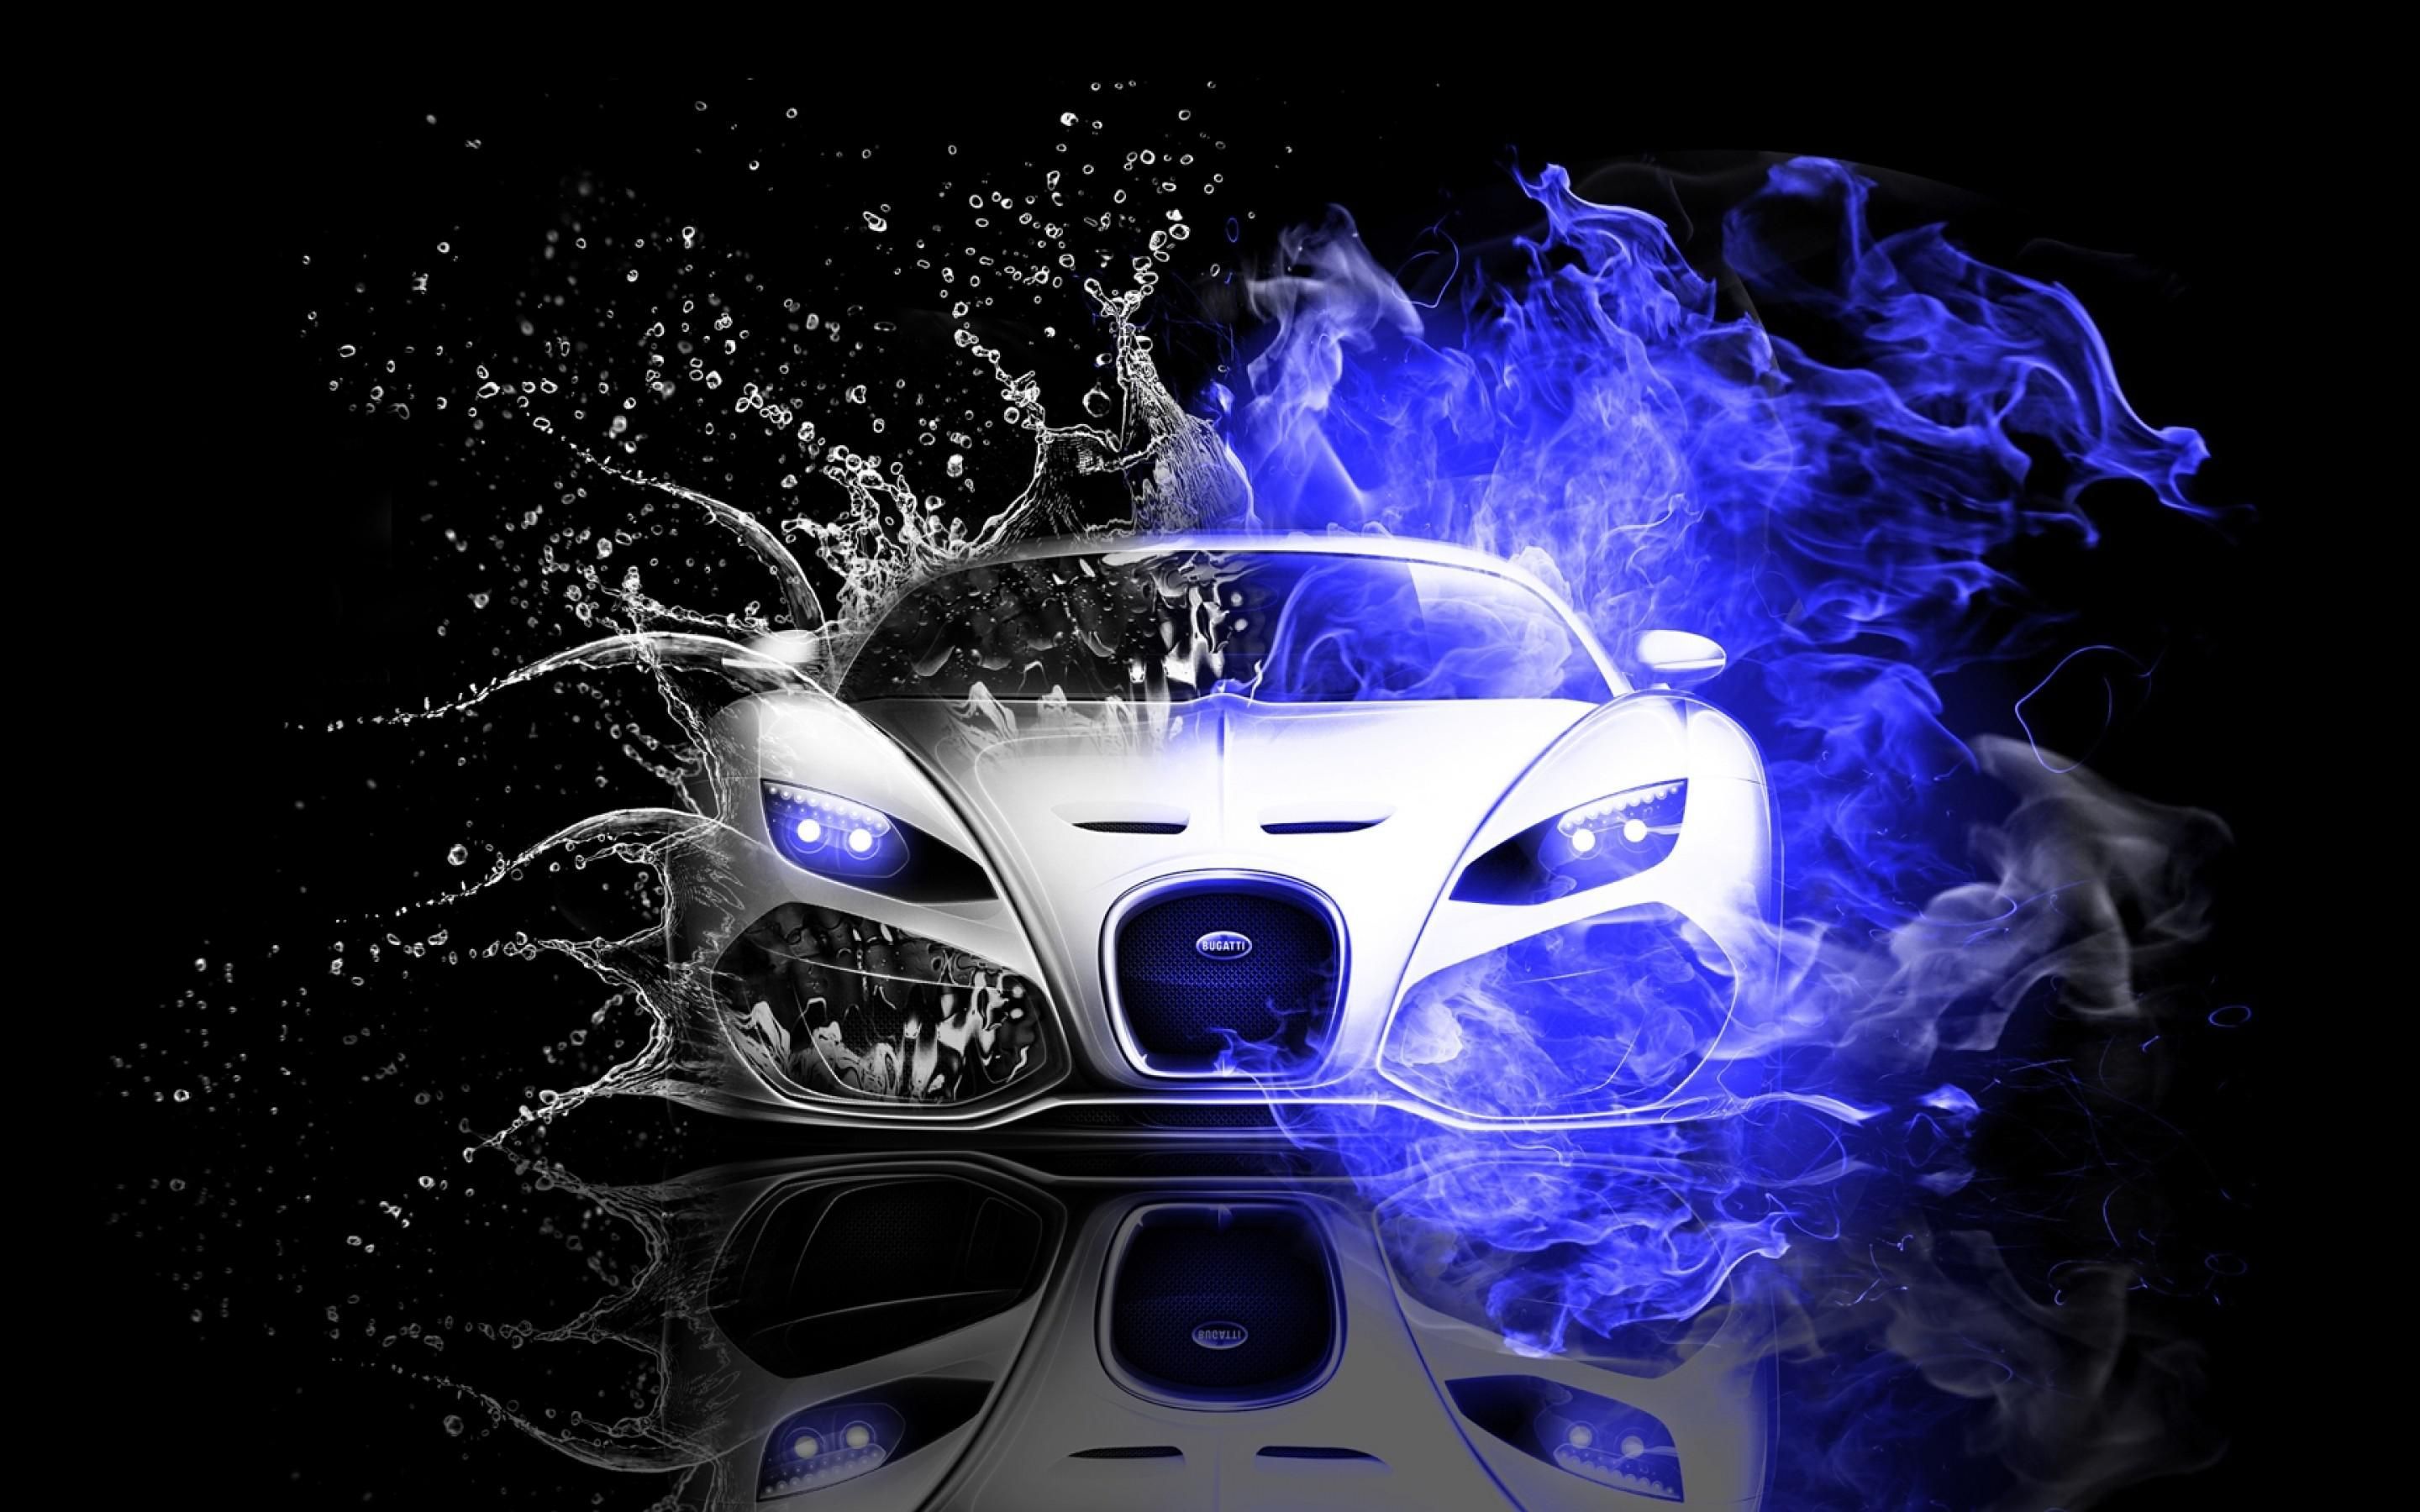 Super Cars Wallpapers on WallpaperDog